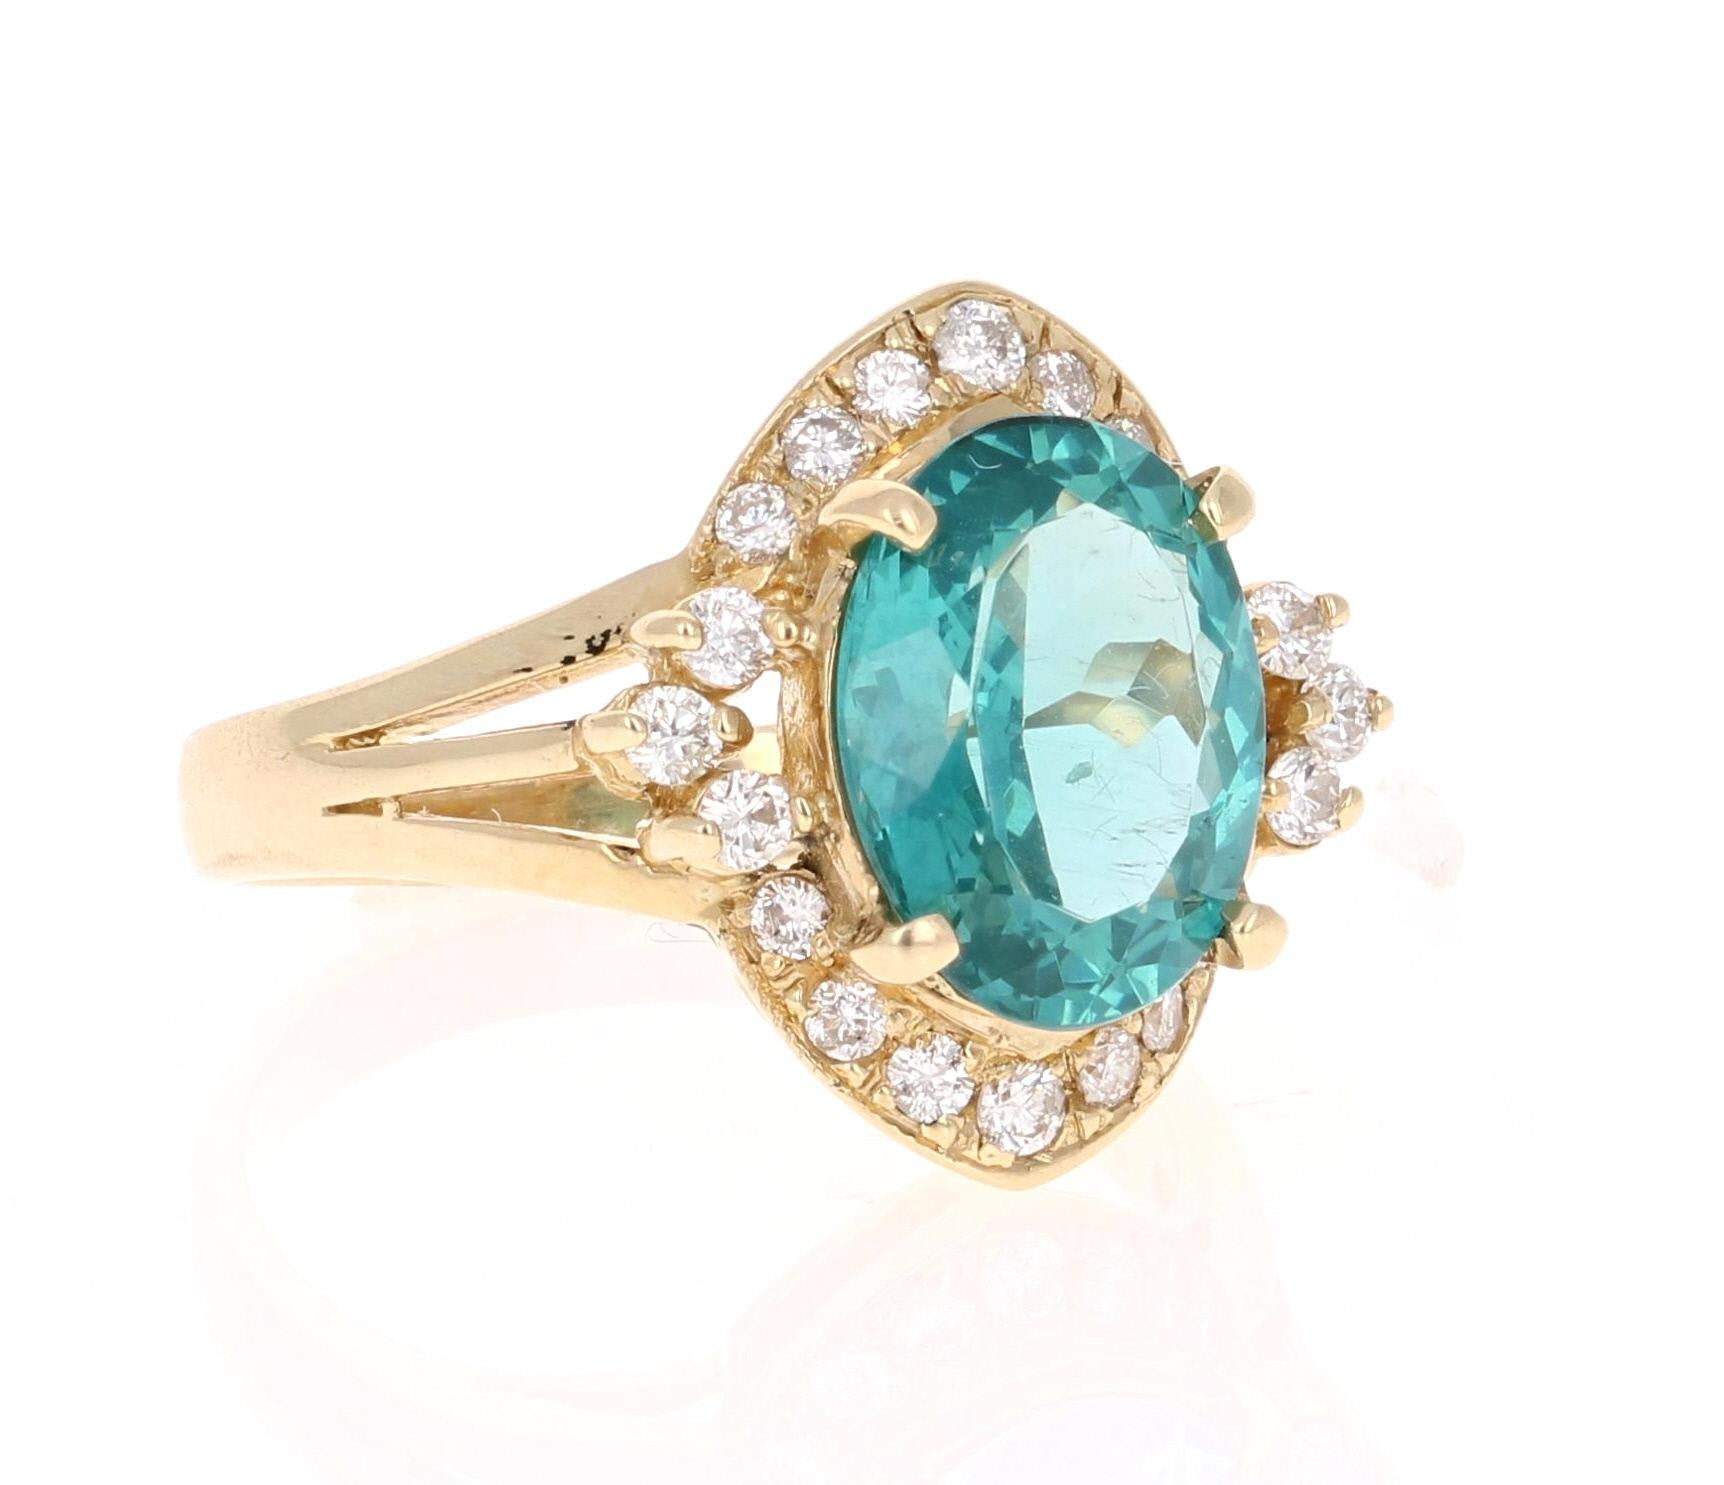 Classic and beautifully designed Apatite and Diamond Ring!  This ring has a 3.33 carat Oval Cut Apatite in the center of the ring and is surrounded by 18 Round Cut Diamonds 0.40 carats. The total carat weight of the ring is 3.73 carats.  

The ring